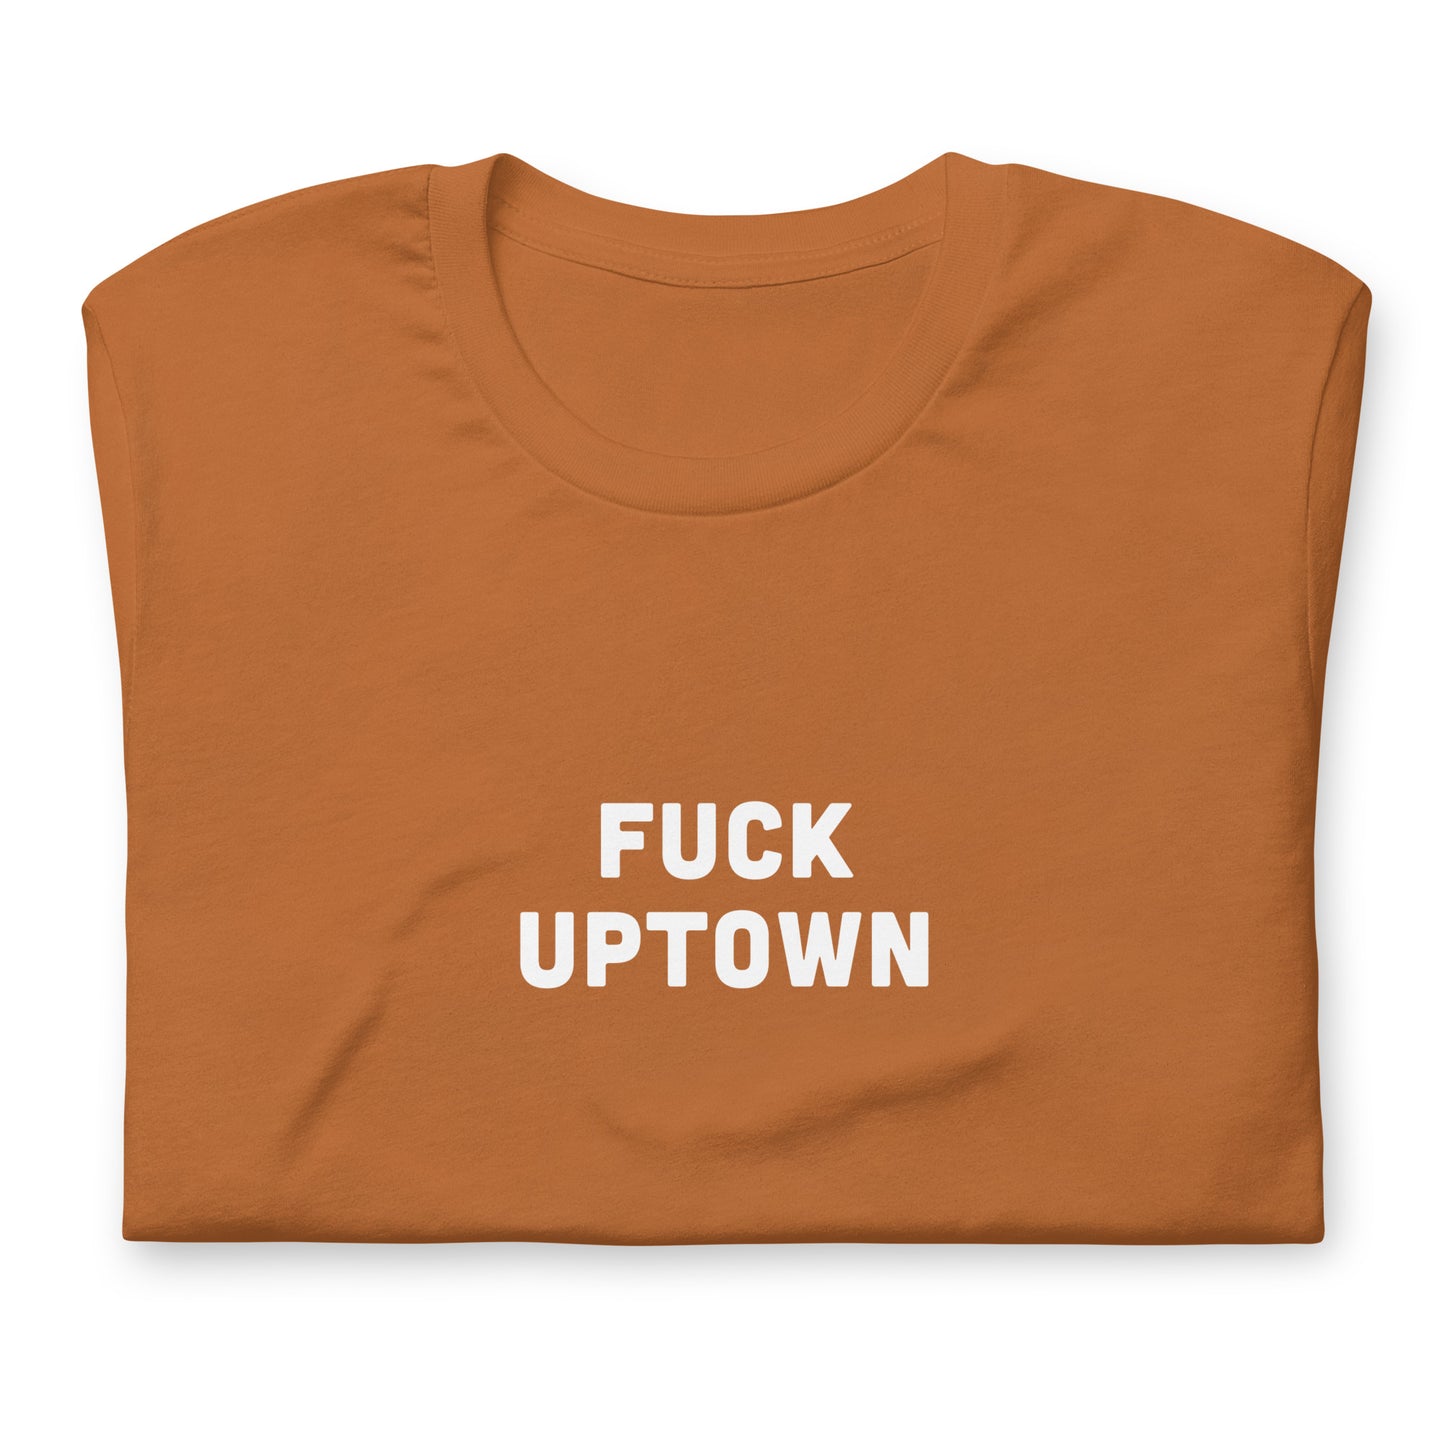 Fuck Uptown T-Shirt Size XL Color Navy